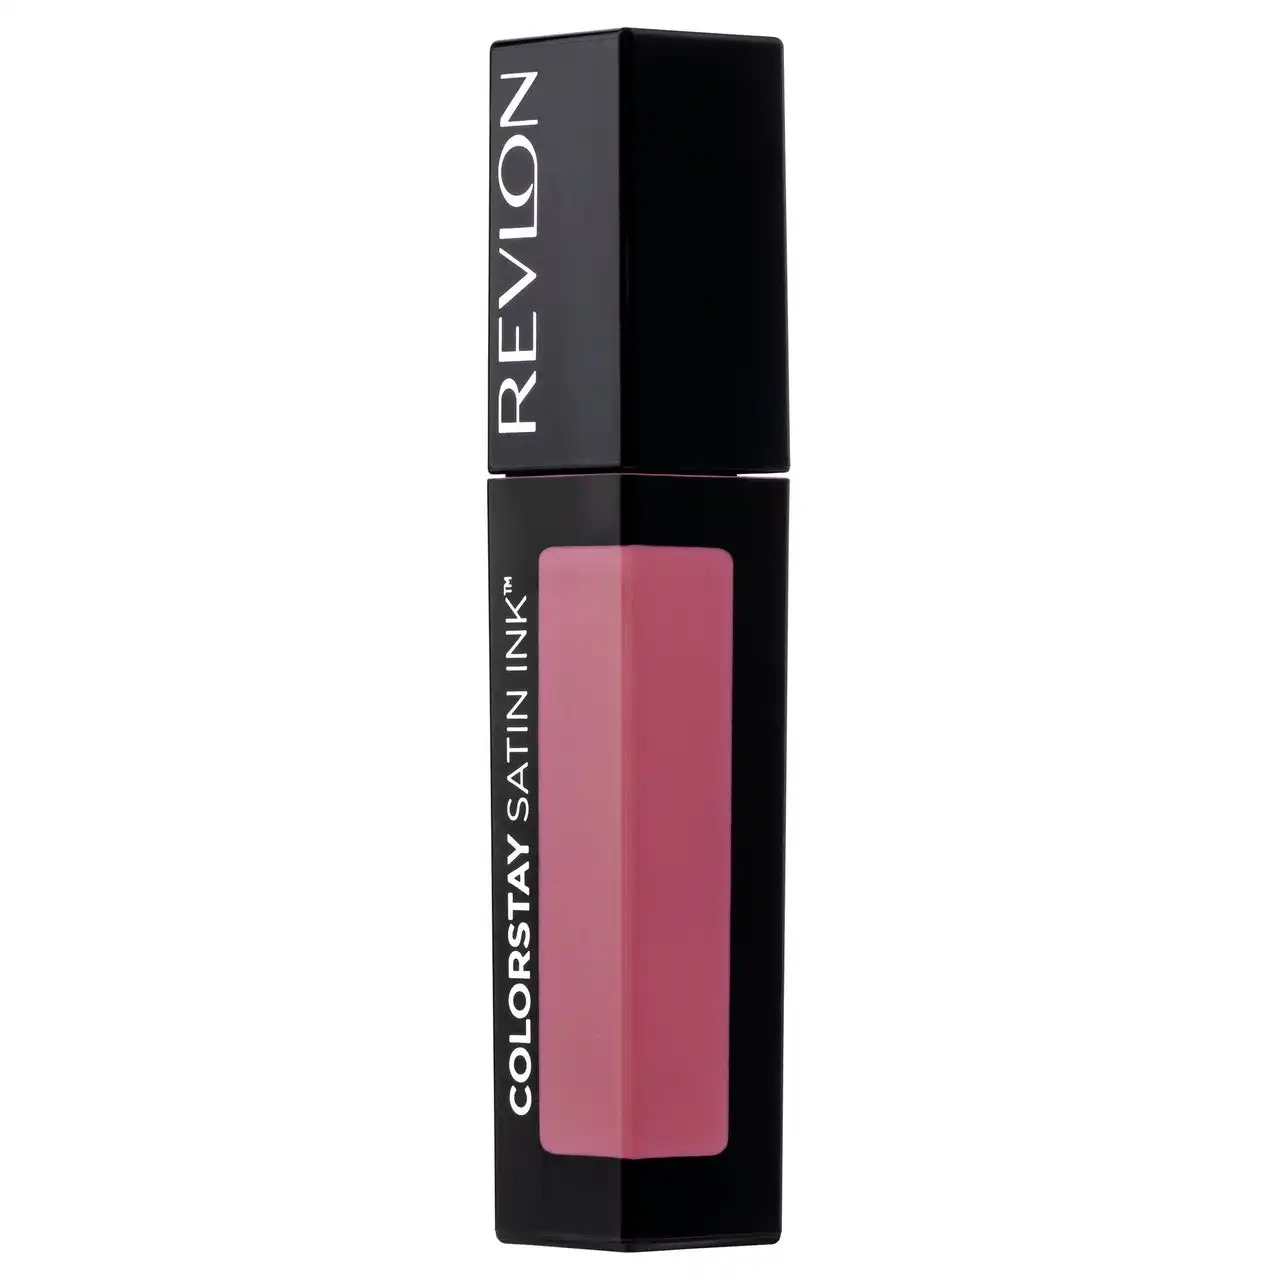 Colorstay Satin Ink(TM) Lipcolor Mauvey, Darling 50mL